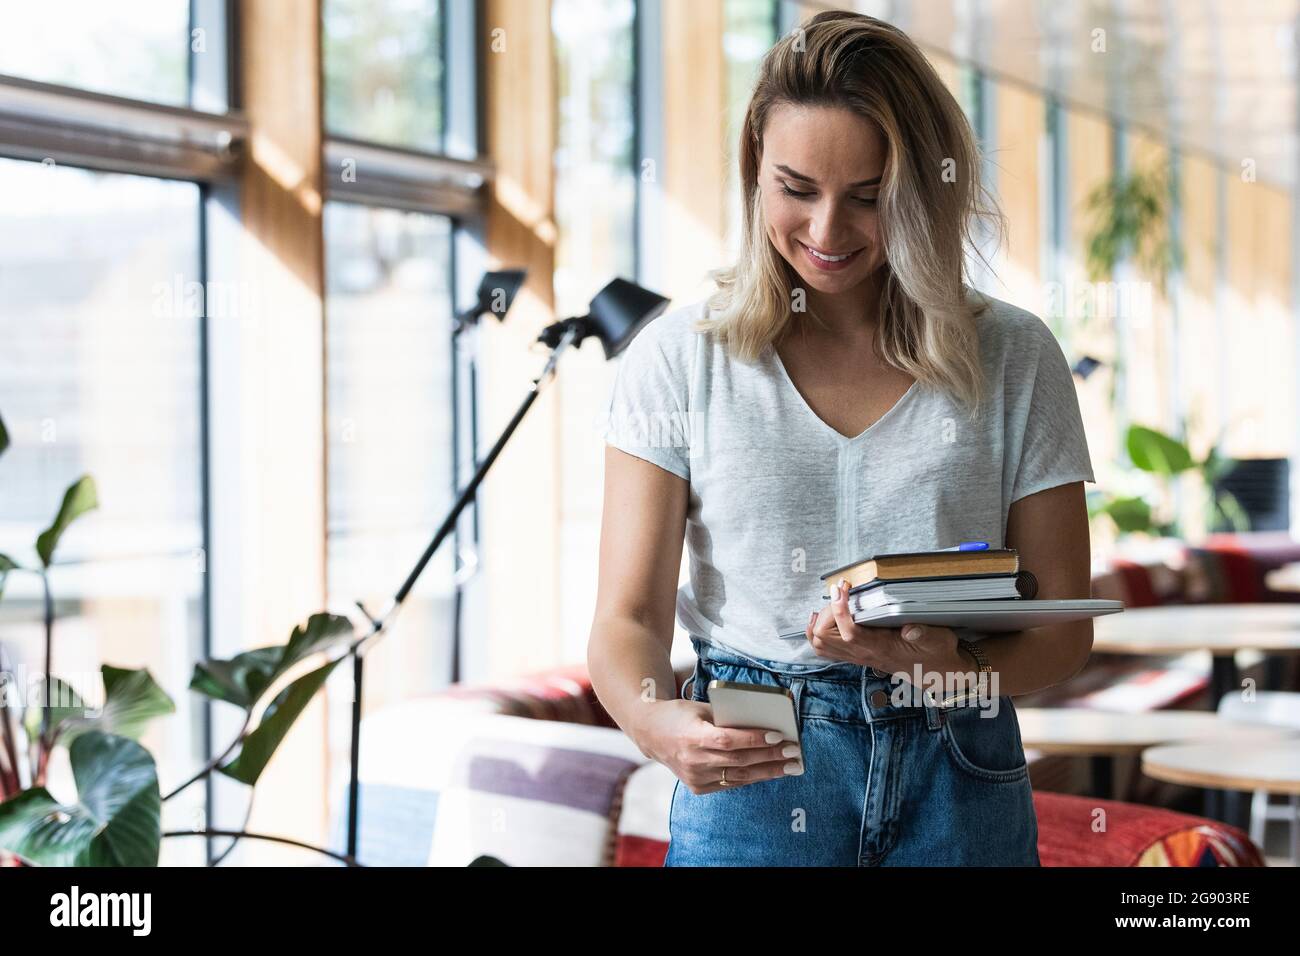 Female freelancer using phone while holding diaries and digital tablet at cafe Stock Photo